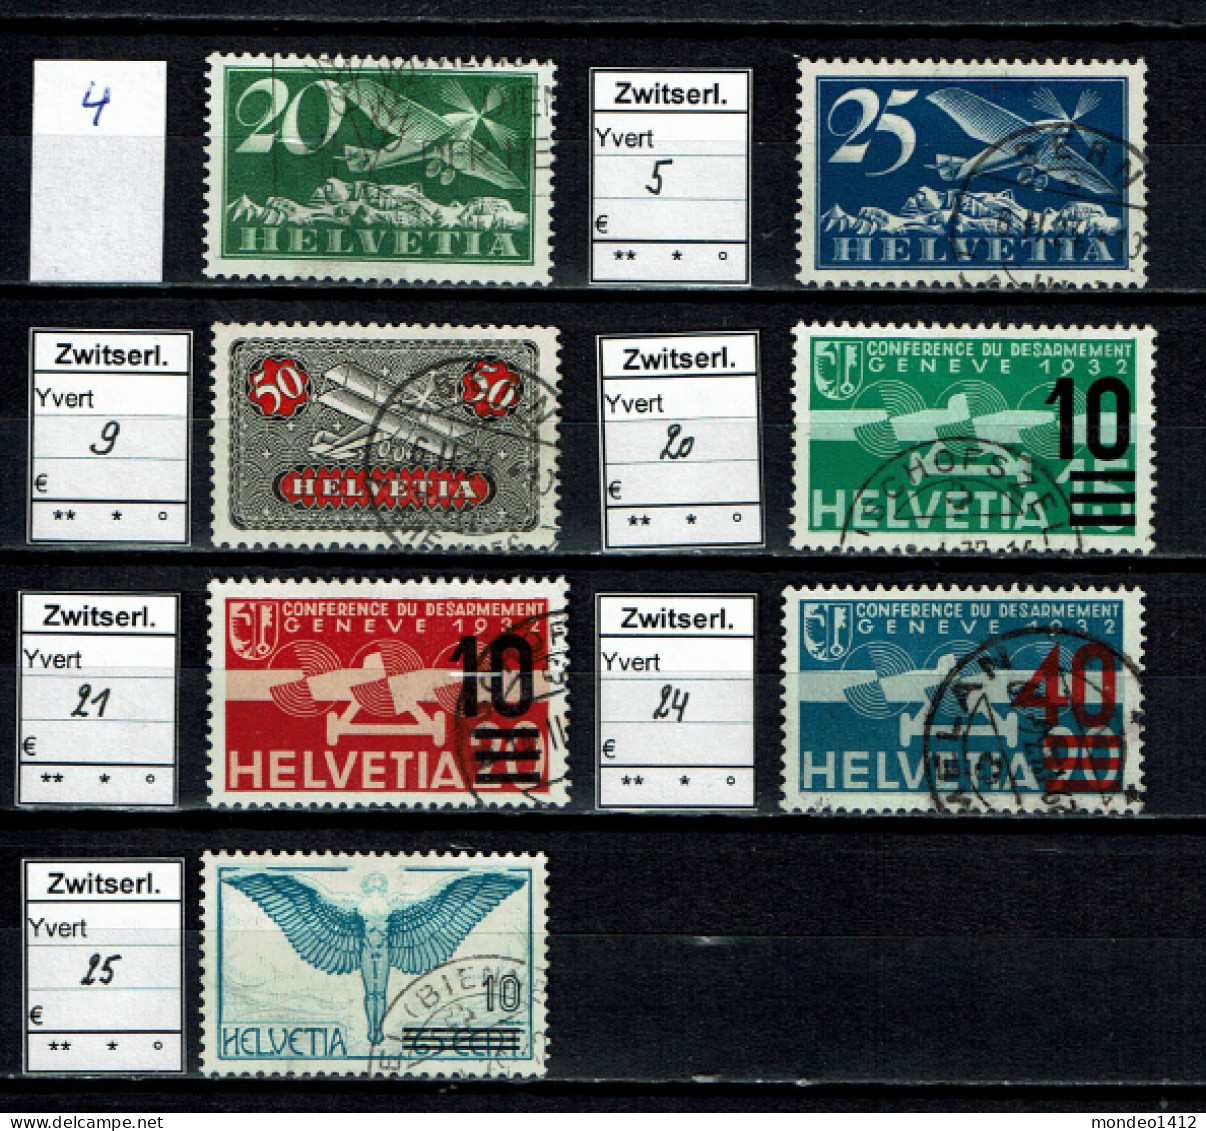 Suisse 1938 - YT 4-5-9-20-21-24-25 - Oblit. Used - Used Stamps